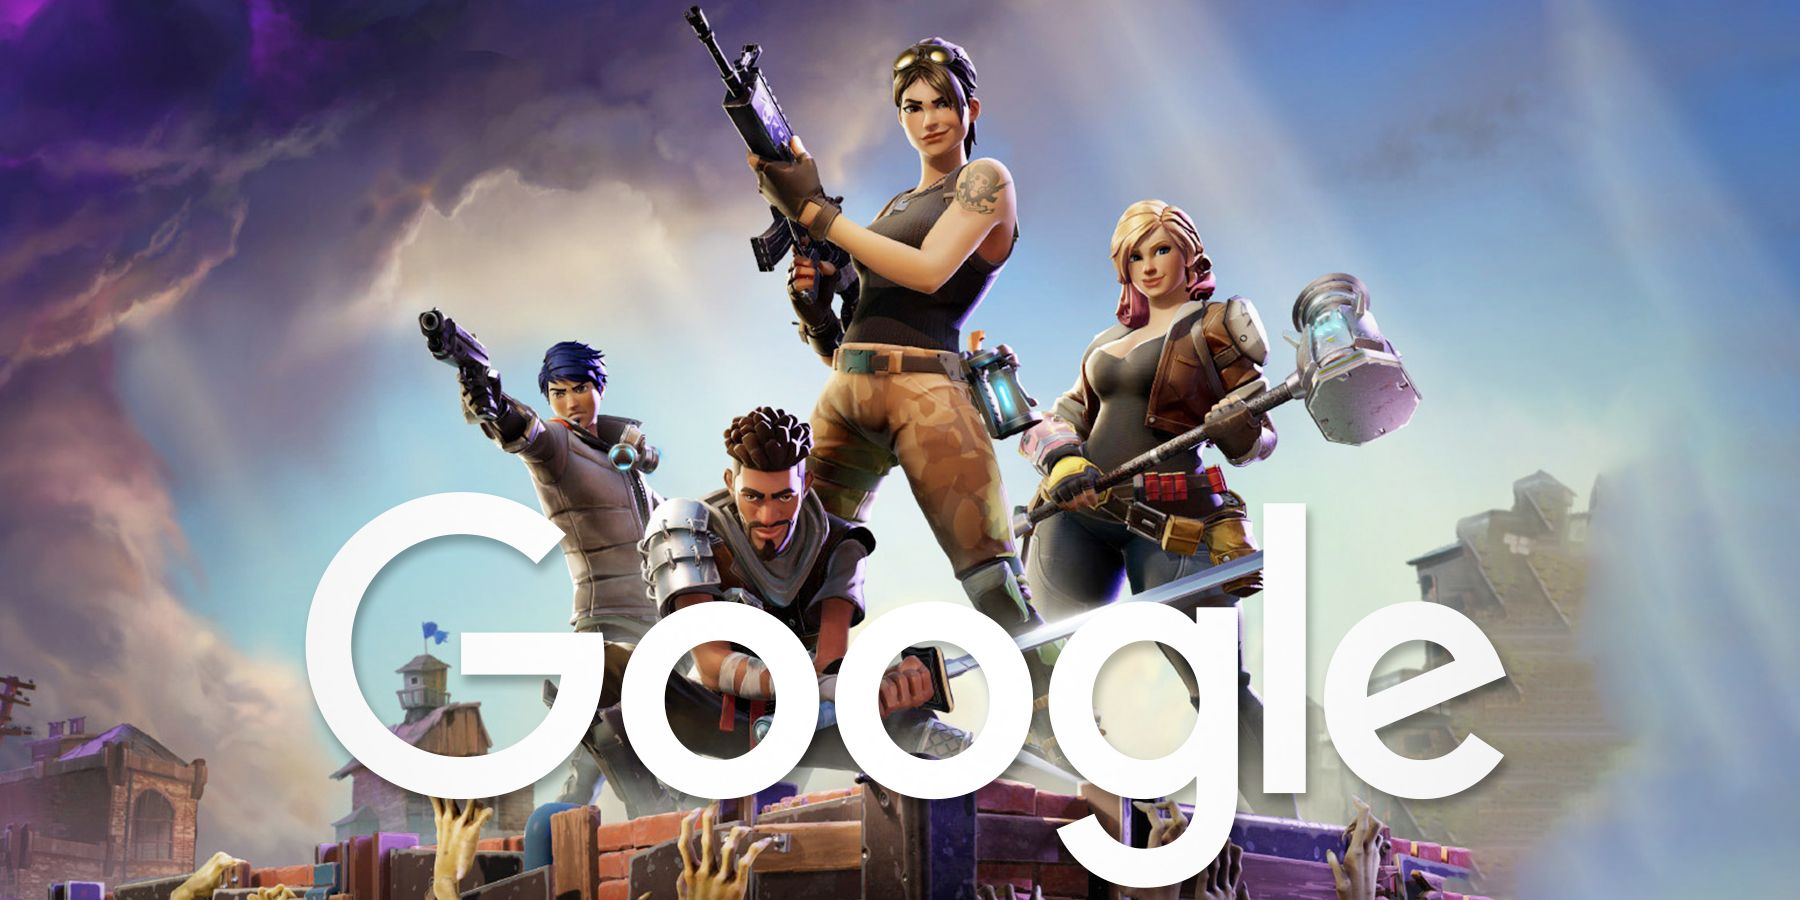 Epic Games yields and releases Fortnite on Android's Google Play Store